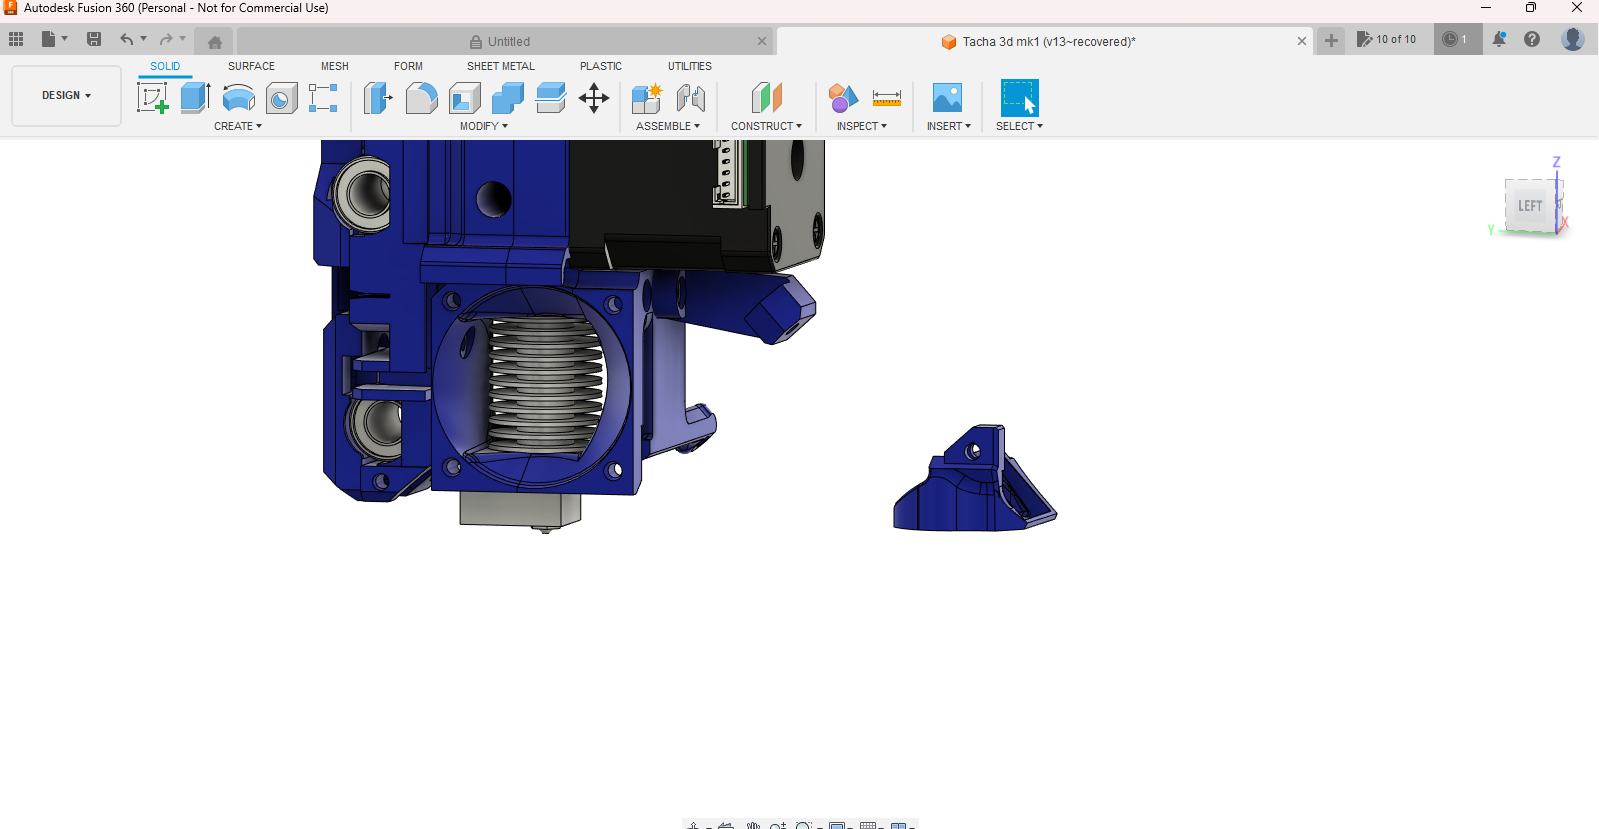 Autodesk Fusion 360 (Personal - Not for Commercial Use) 6_29_2023 10_11_41 PM.png